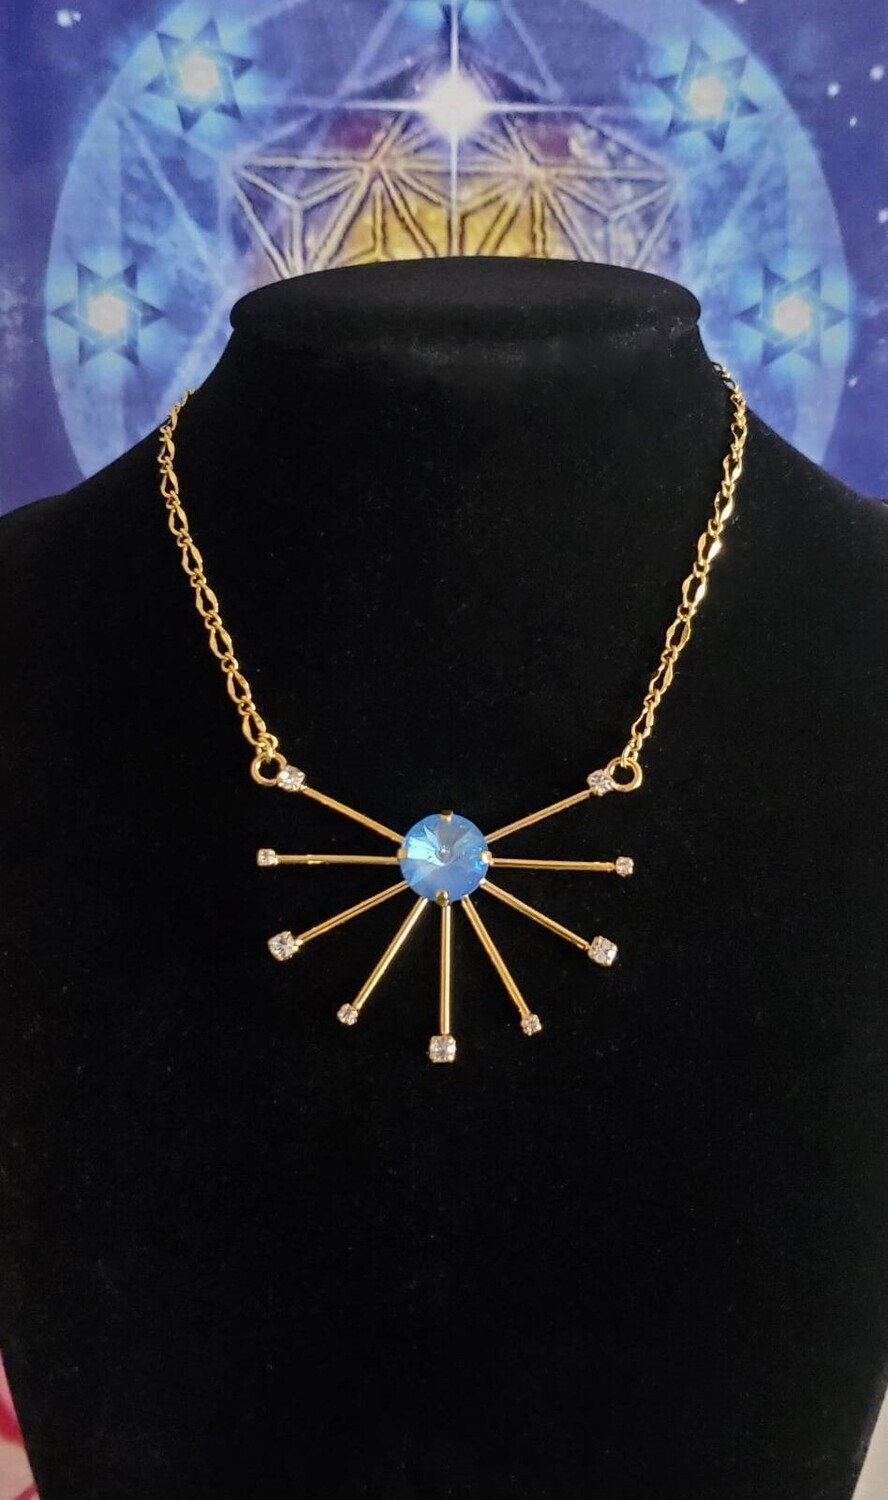 Gold Sacred Blue Ray Star Codes Higher Self Higher Frequency Activator Throat chakra/Crown Pendant 188.00